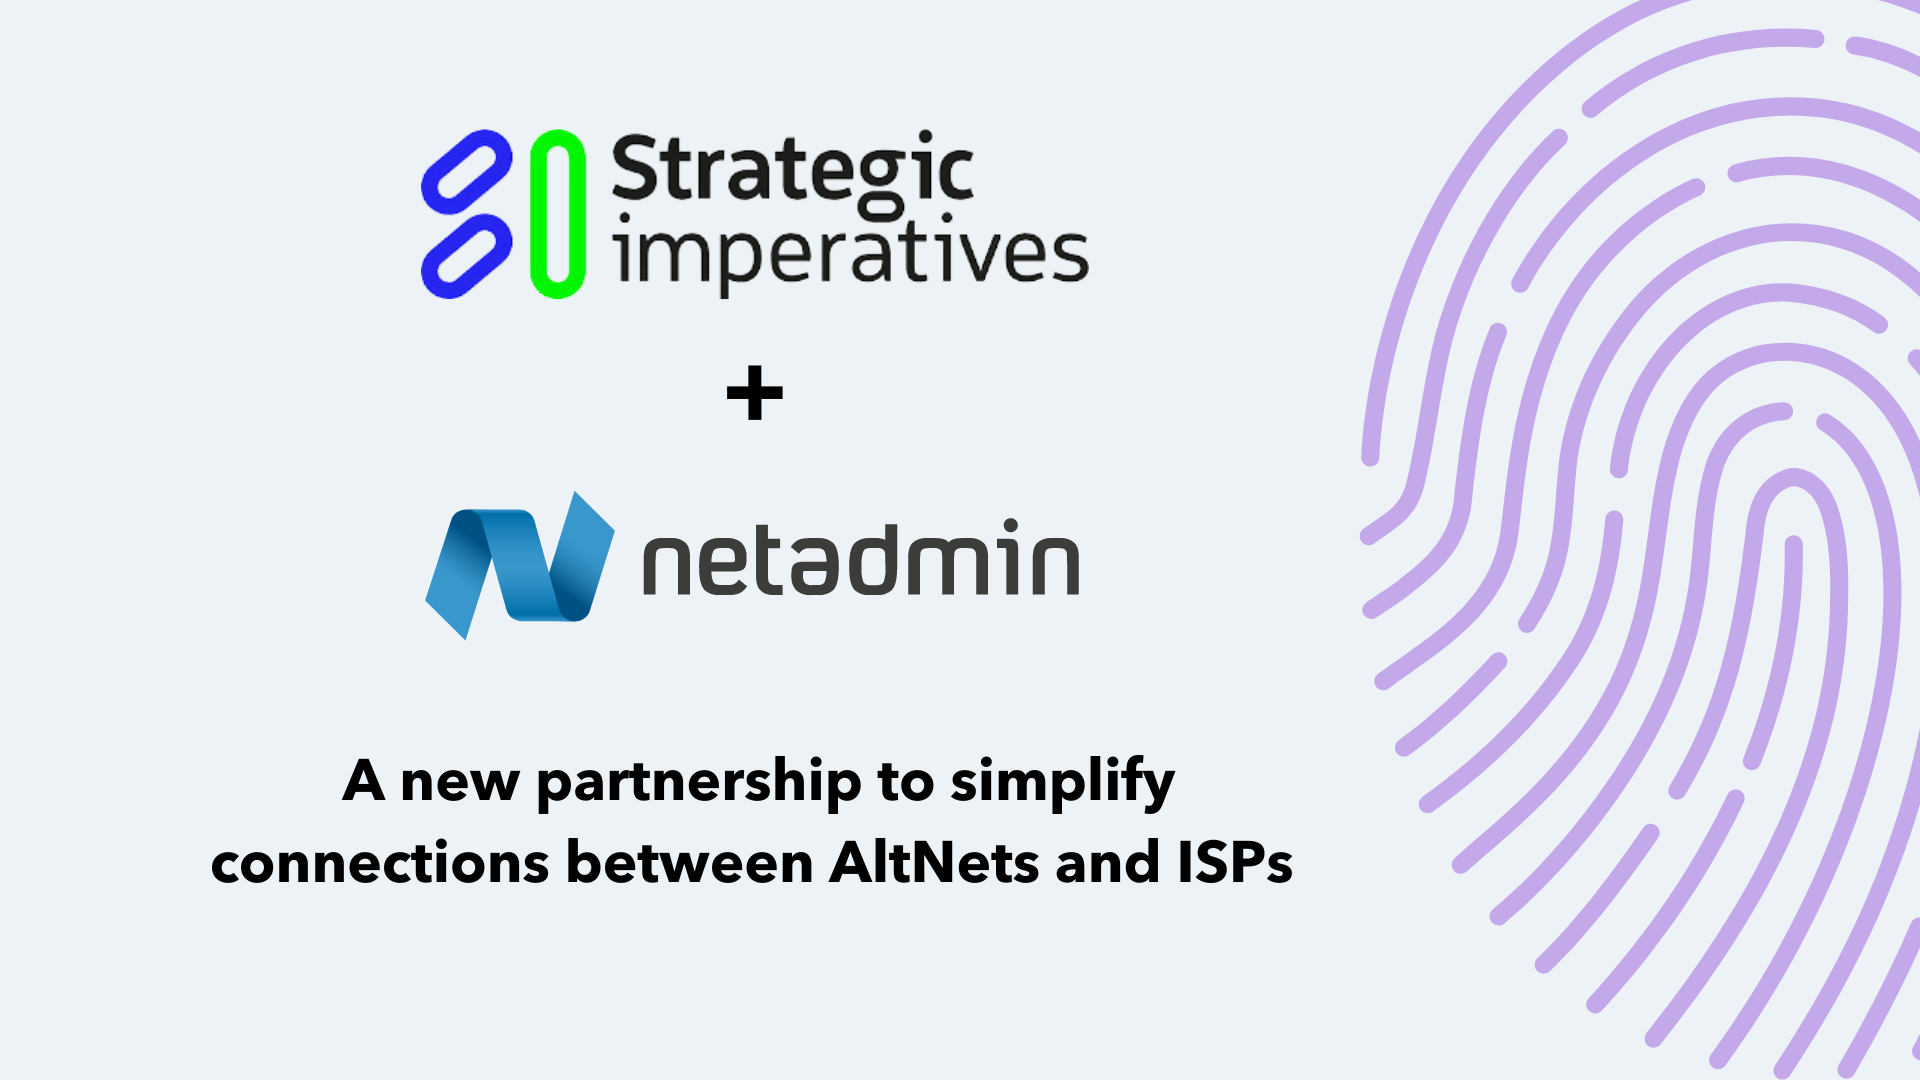 Netadmin and Strategic Imperatives join forces to simplify connections between Altnets and ISPs